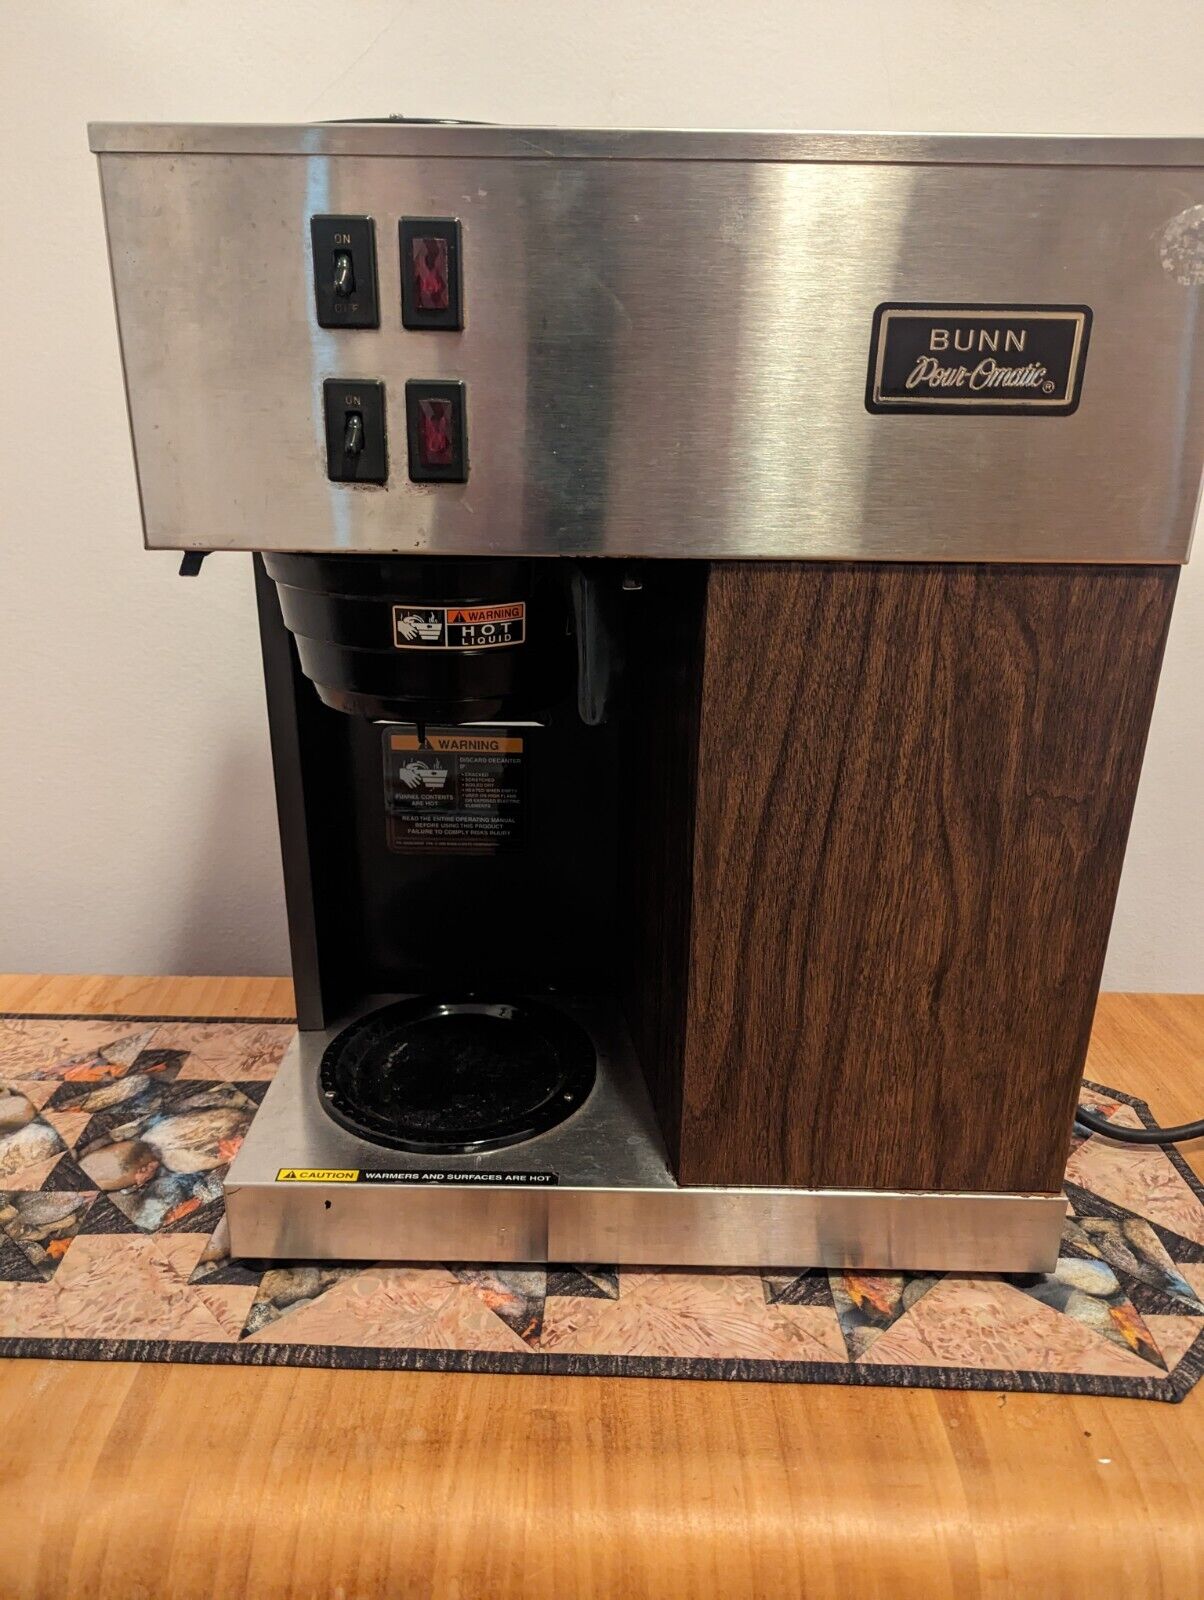 BUNN-O-MATIC VPR 04276-0003 Commercial Coffee Maker Pots Not Included